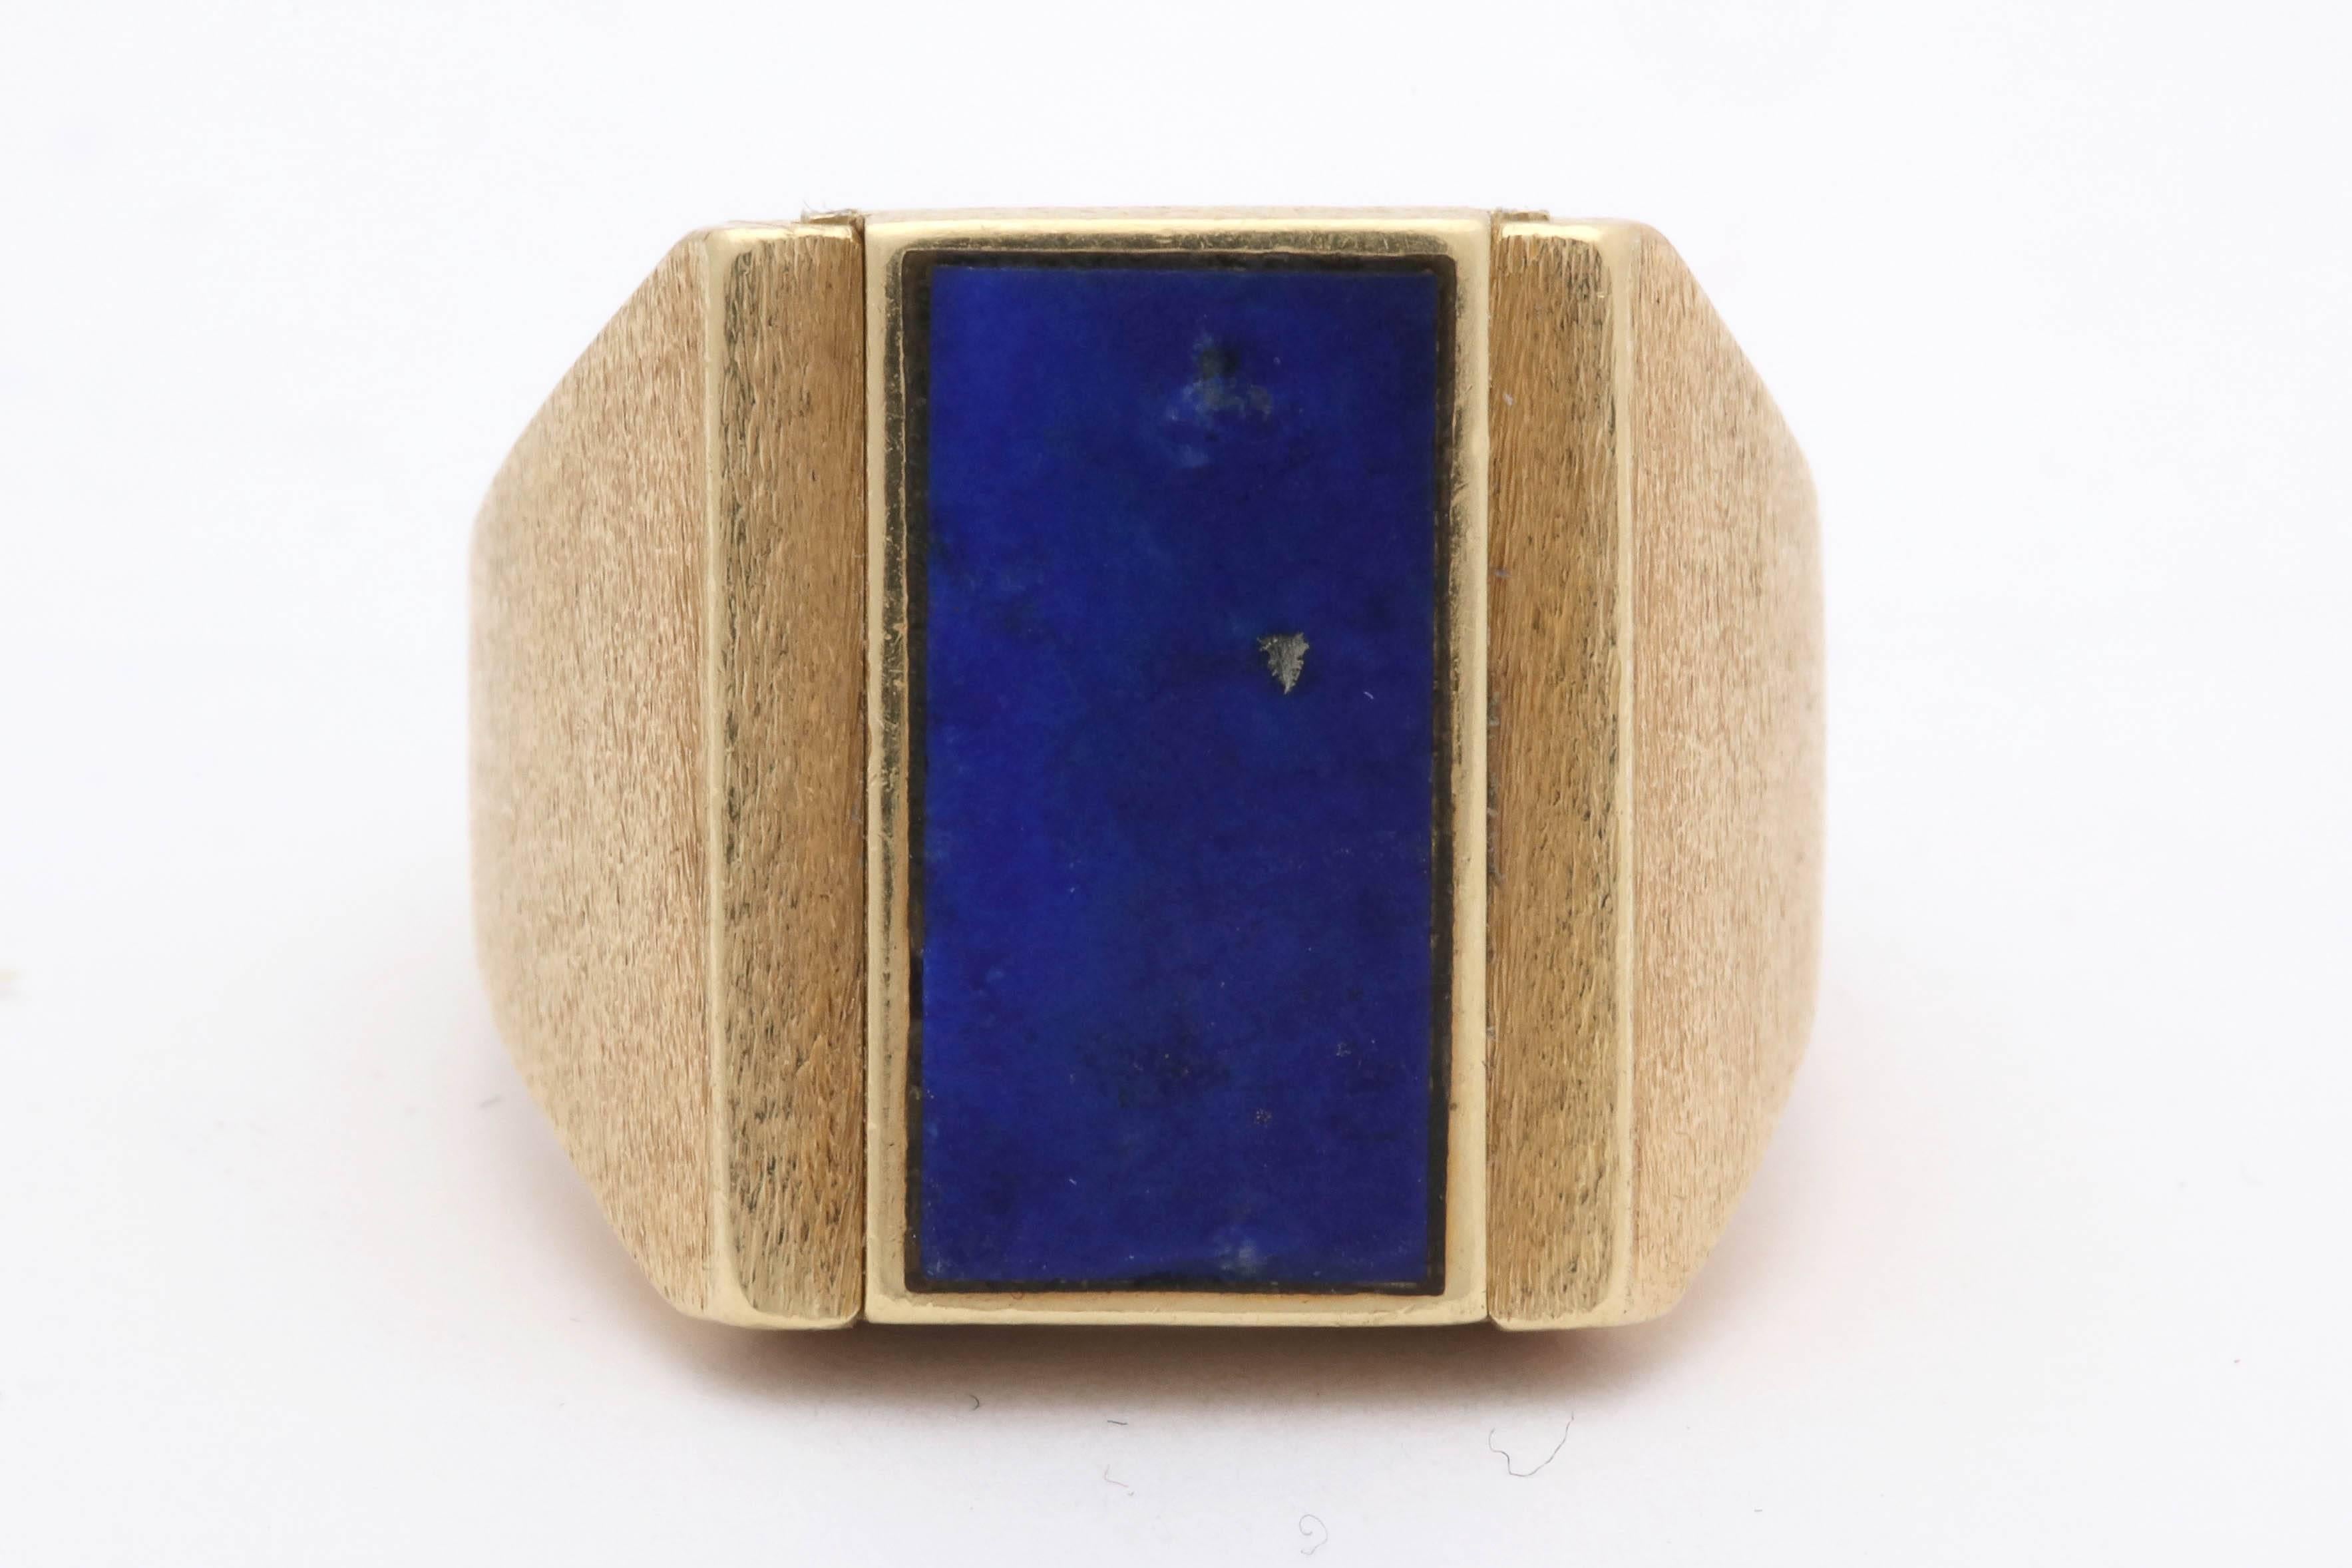 One Gentleman's 18kt  Stone Finish Yellow Gold Flip Ring Composed Of On One Side A 17MM Rectangular Cut Lapis Lazuli And It May Flip To A 17MM  High Qualty And High Luster Rectangular Cut Tiger's Eye Stone.Very Rare To Find Men's Flip Rings .